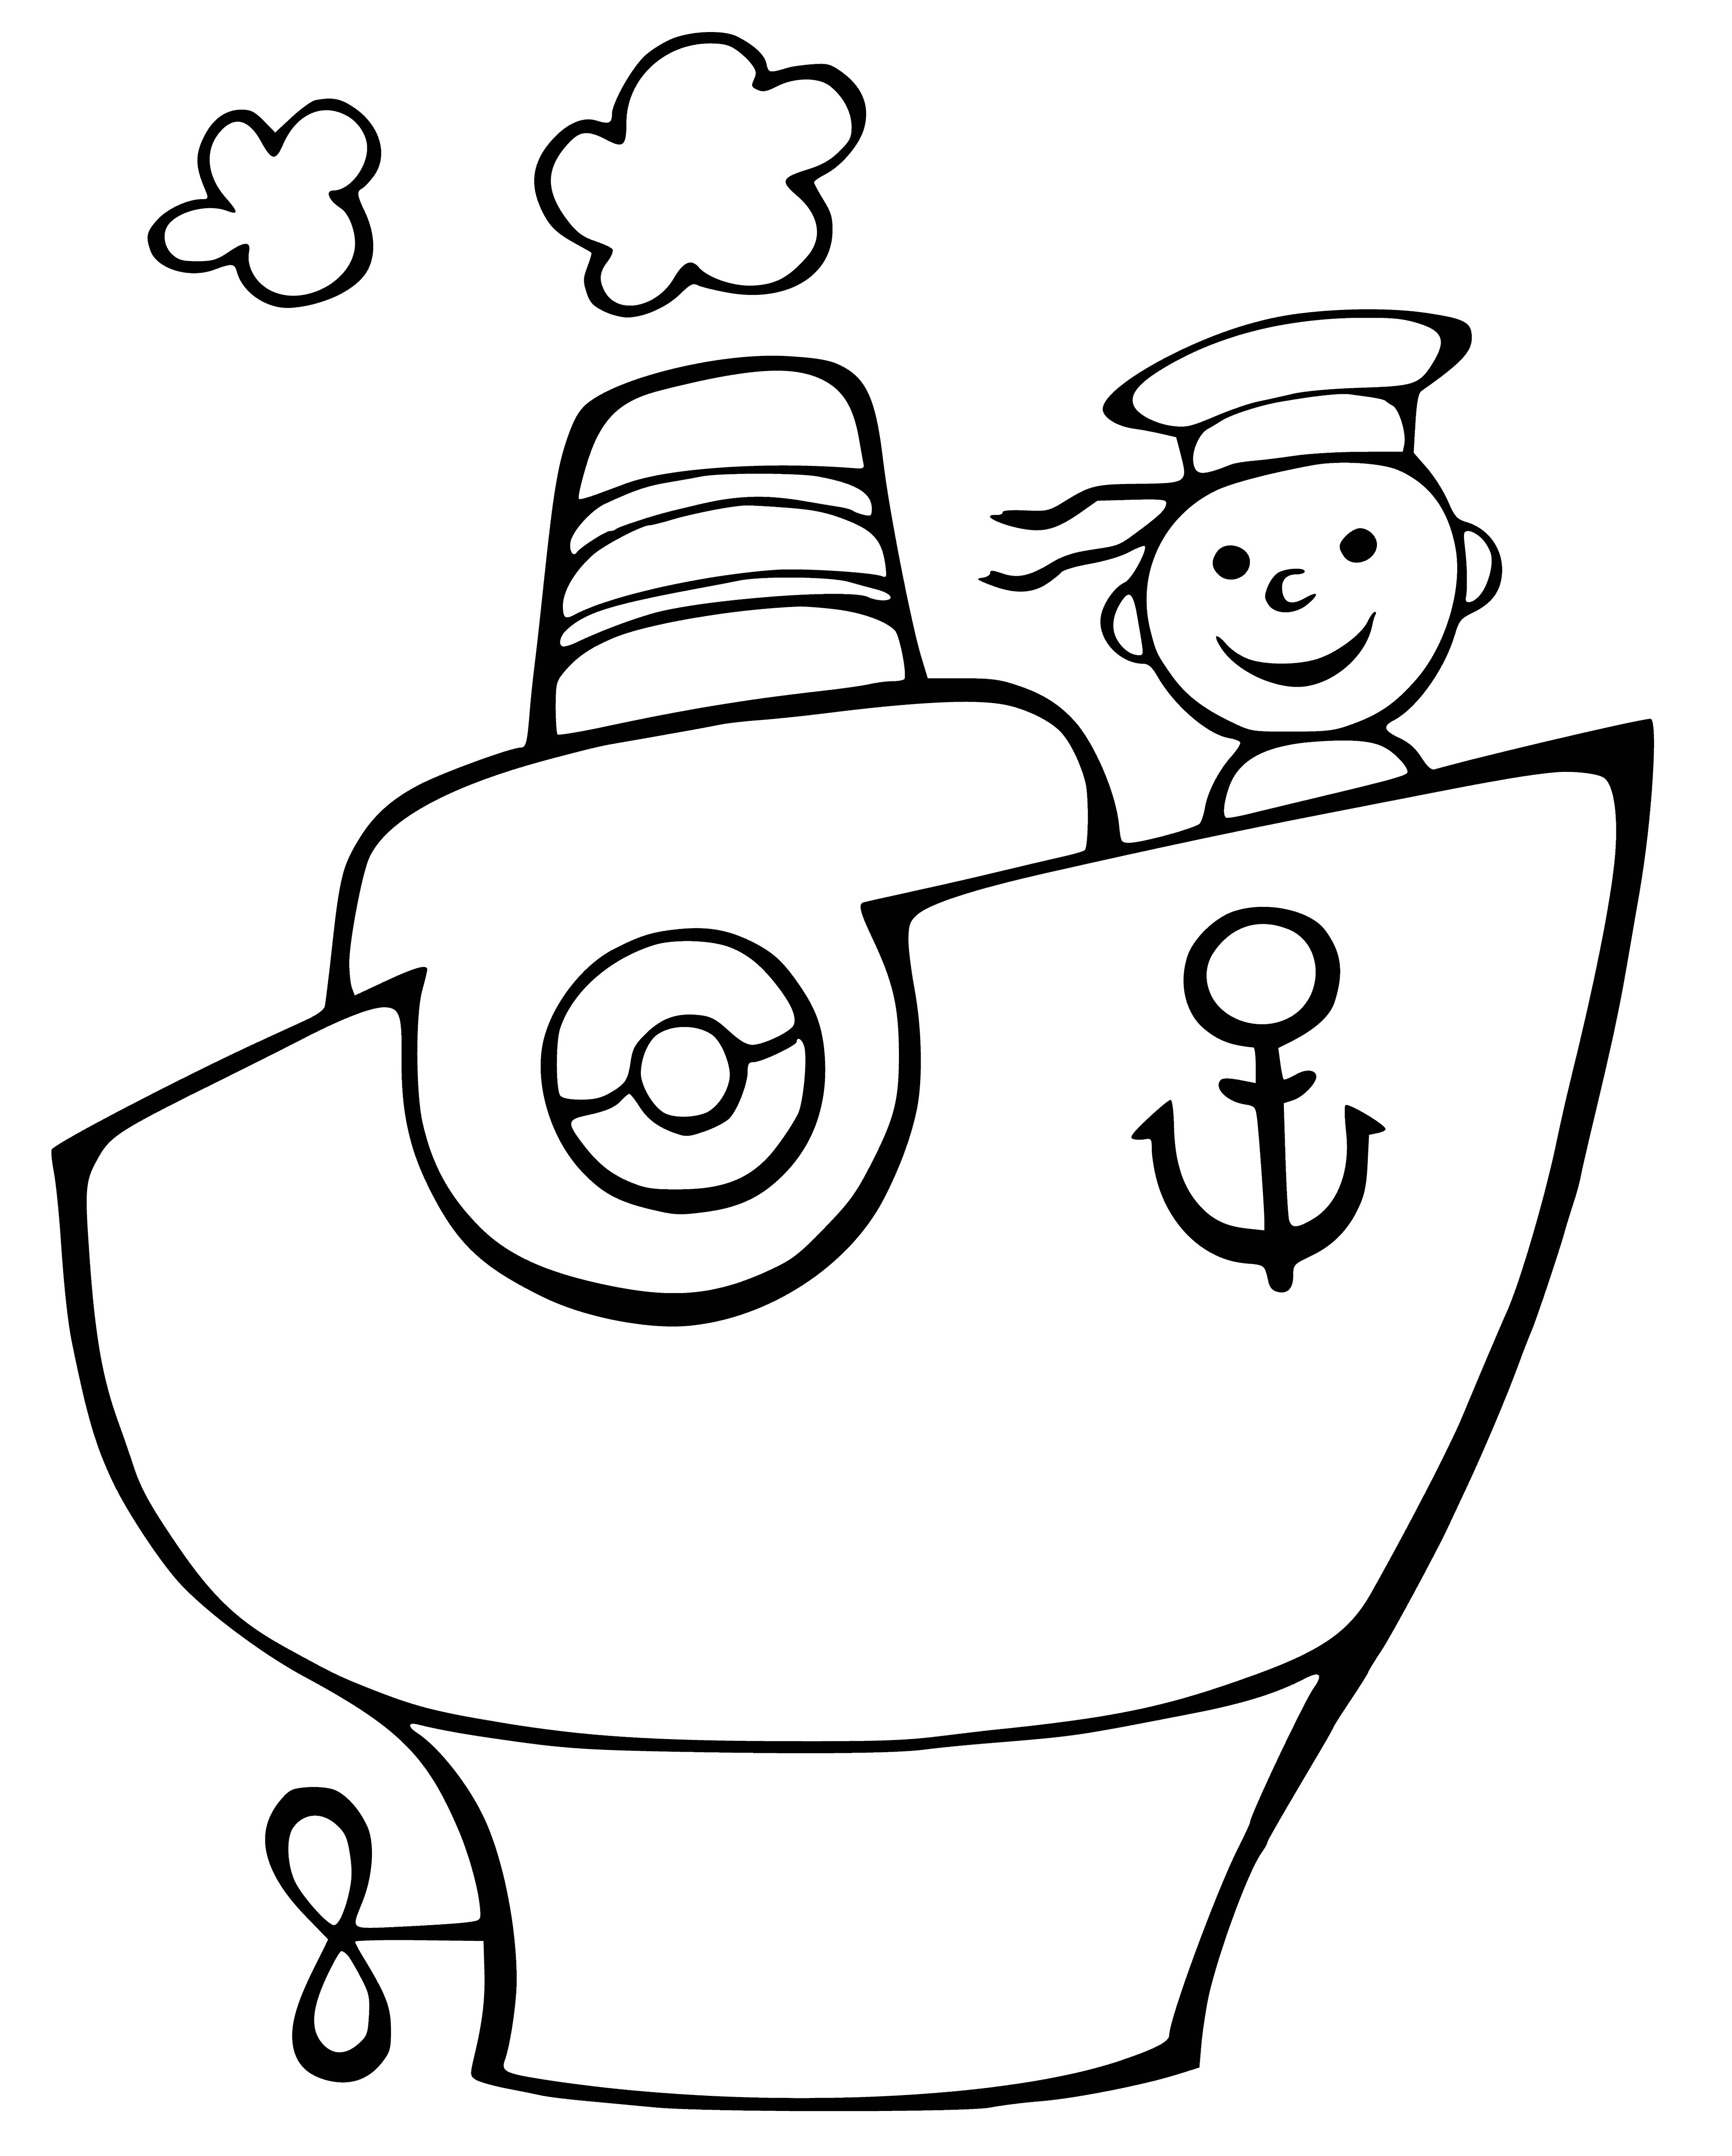 coloring page: Large ship sailing on ocean: pointed front, several windows, decks, large sliding door at back.